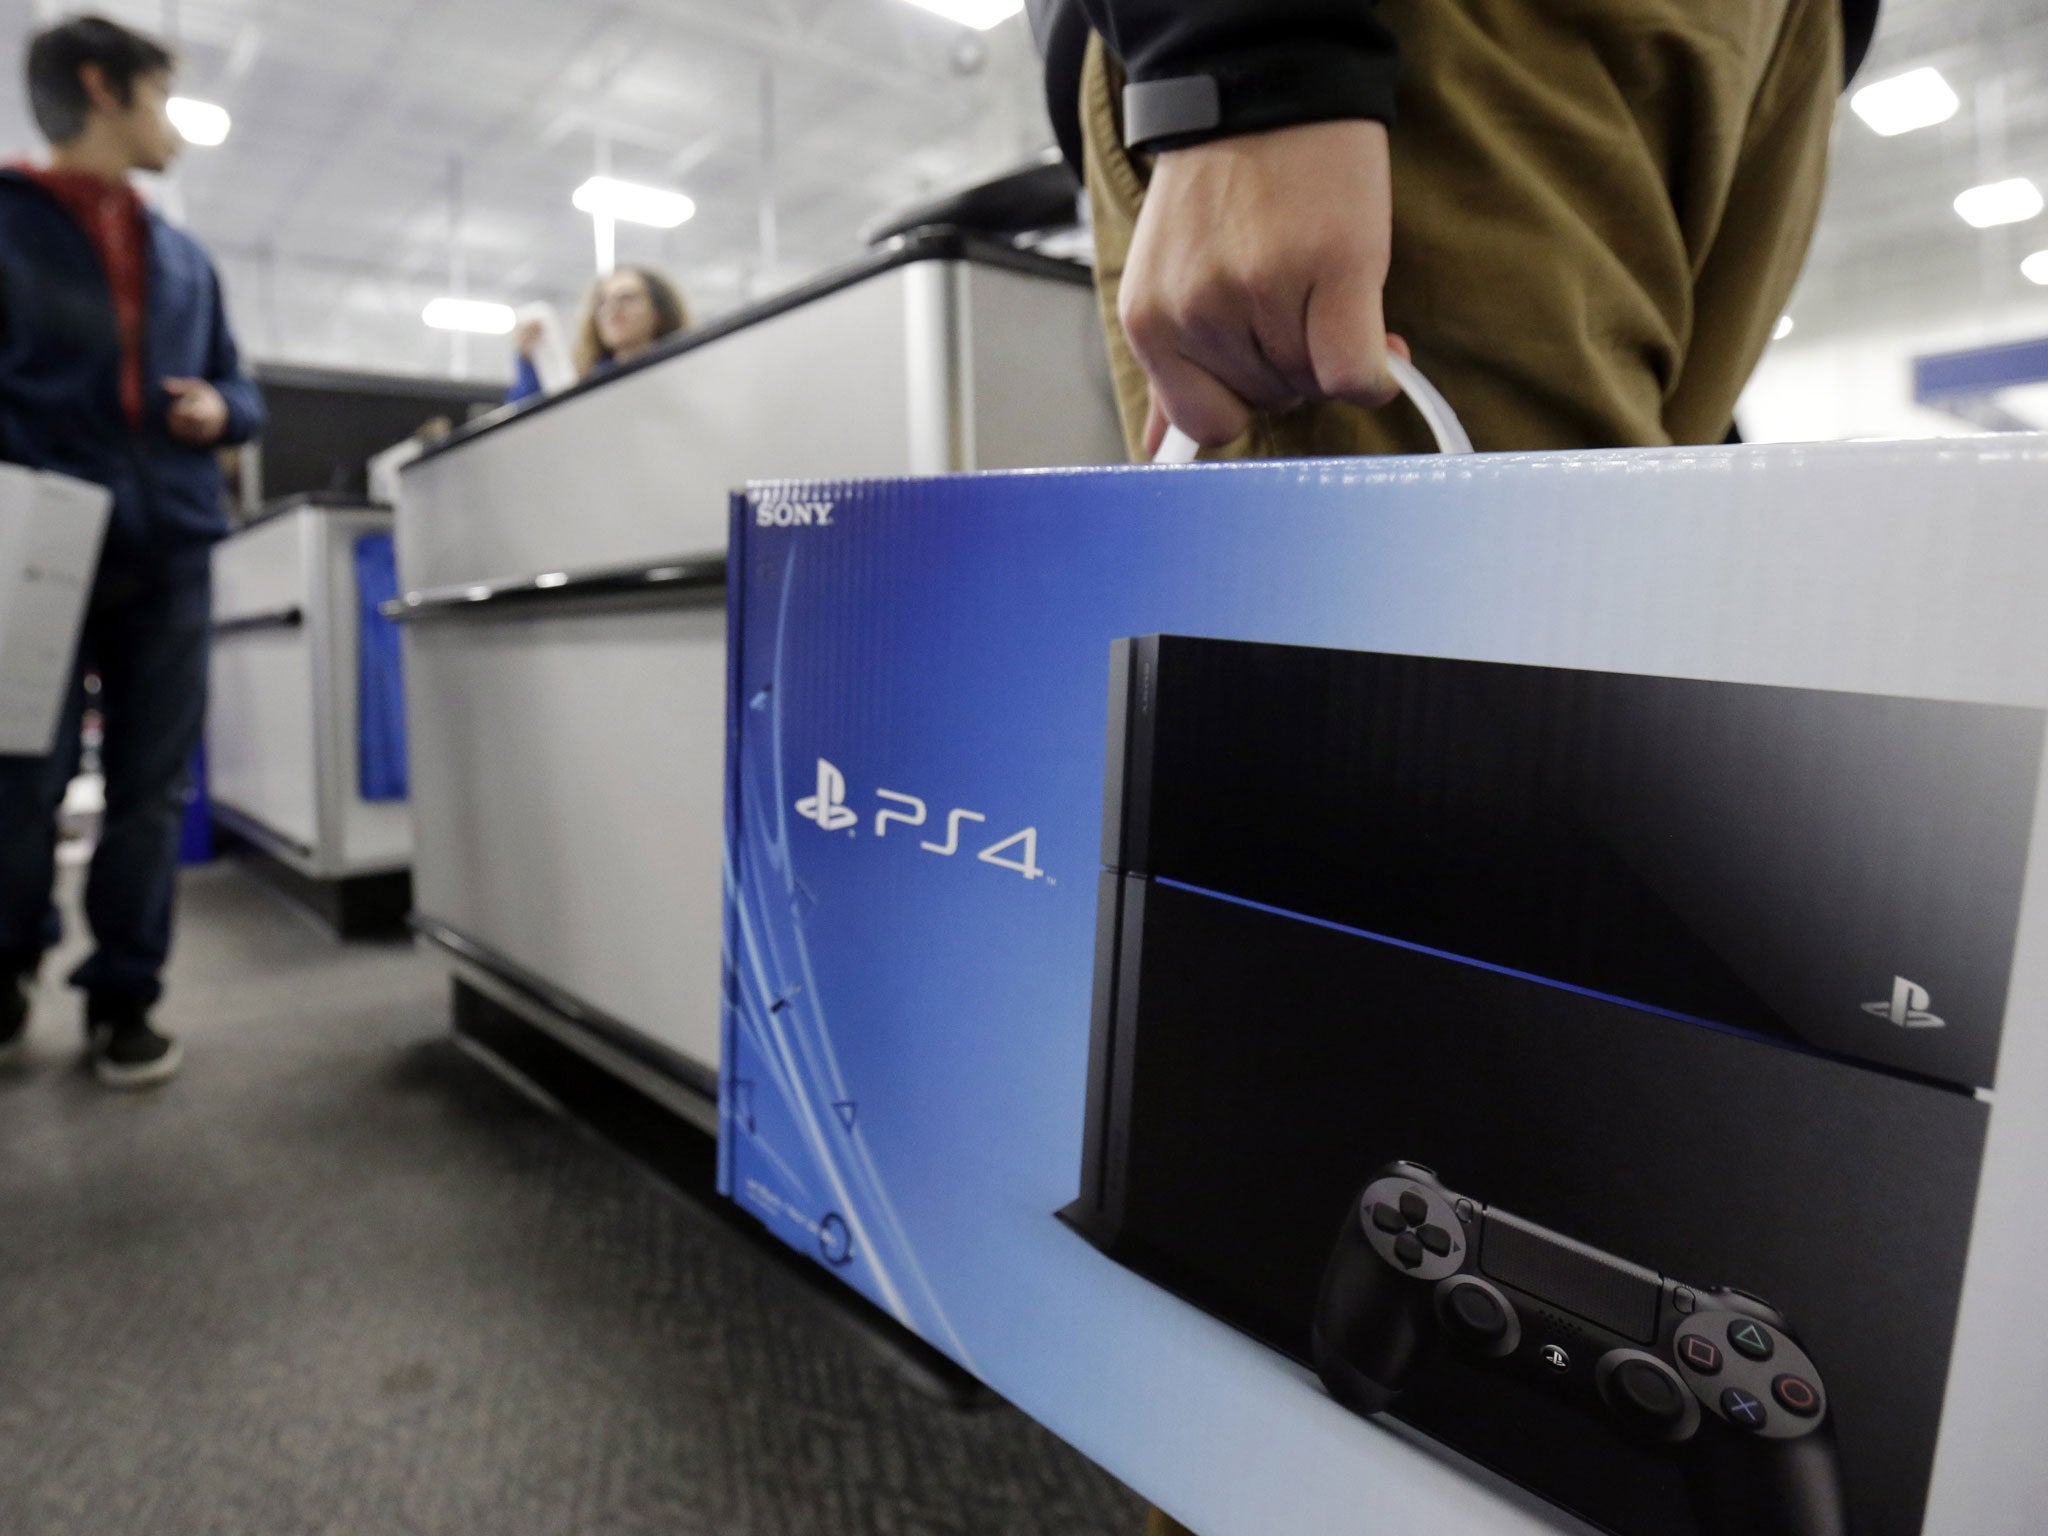 The Playstation 4 console retails for £349 – £80 less than its rival Microsoft's Xbox One system